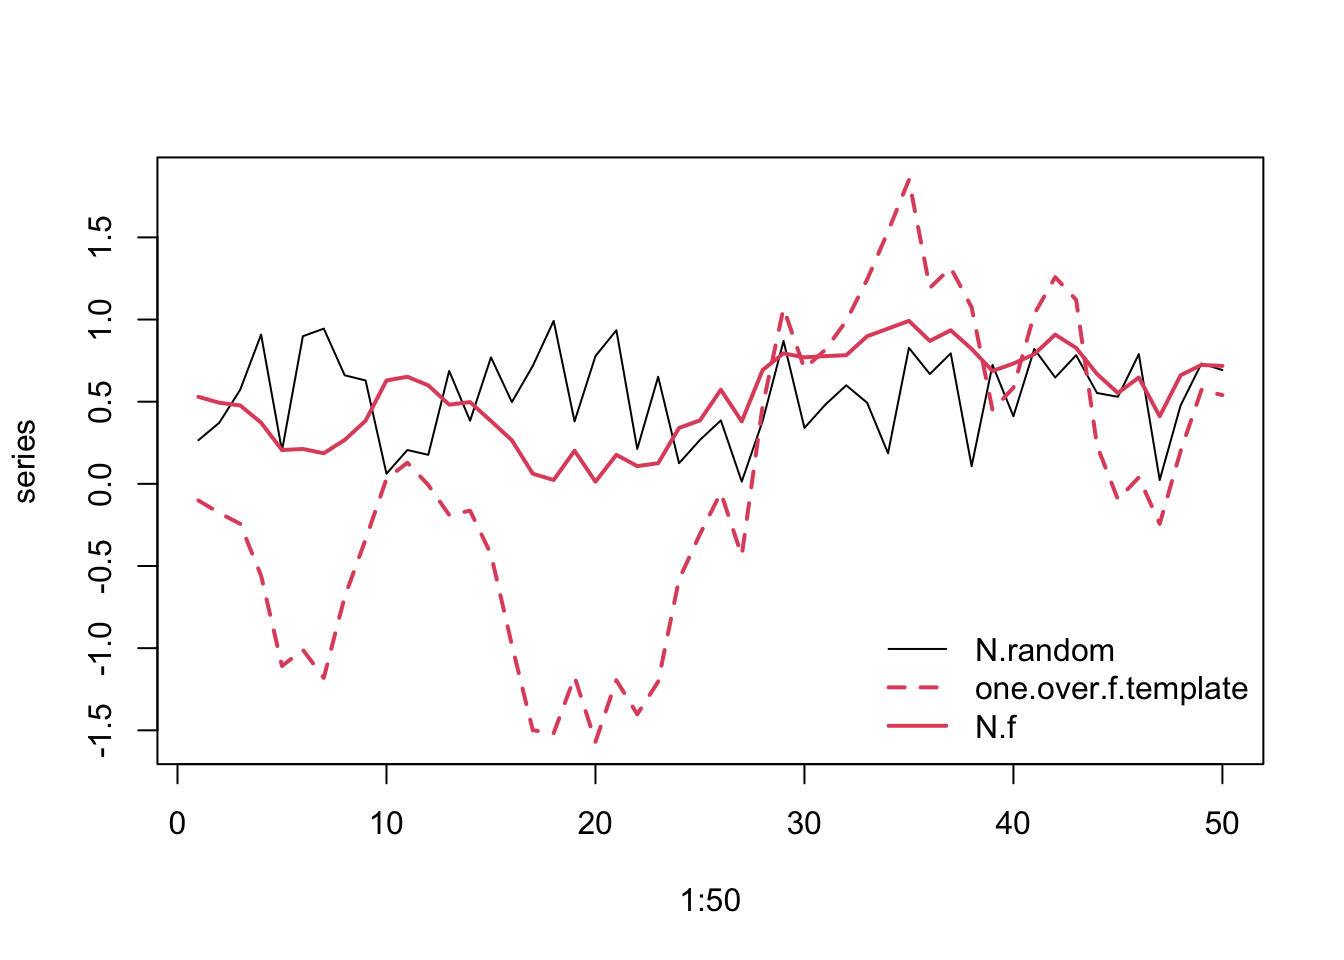 Example of spectral mimicry, showing the original random data points (solid black line), the template ('one.over.f.template', red dashed line), and the rearranged, reddened data points (solid red line).